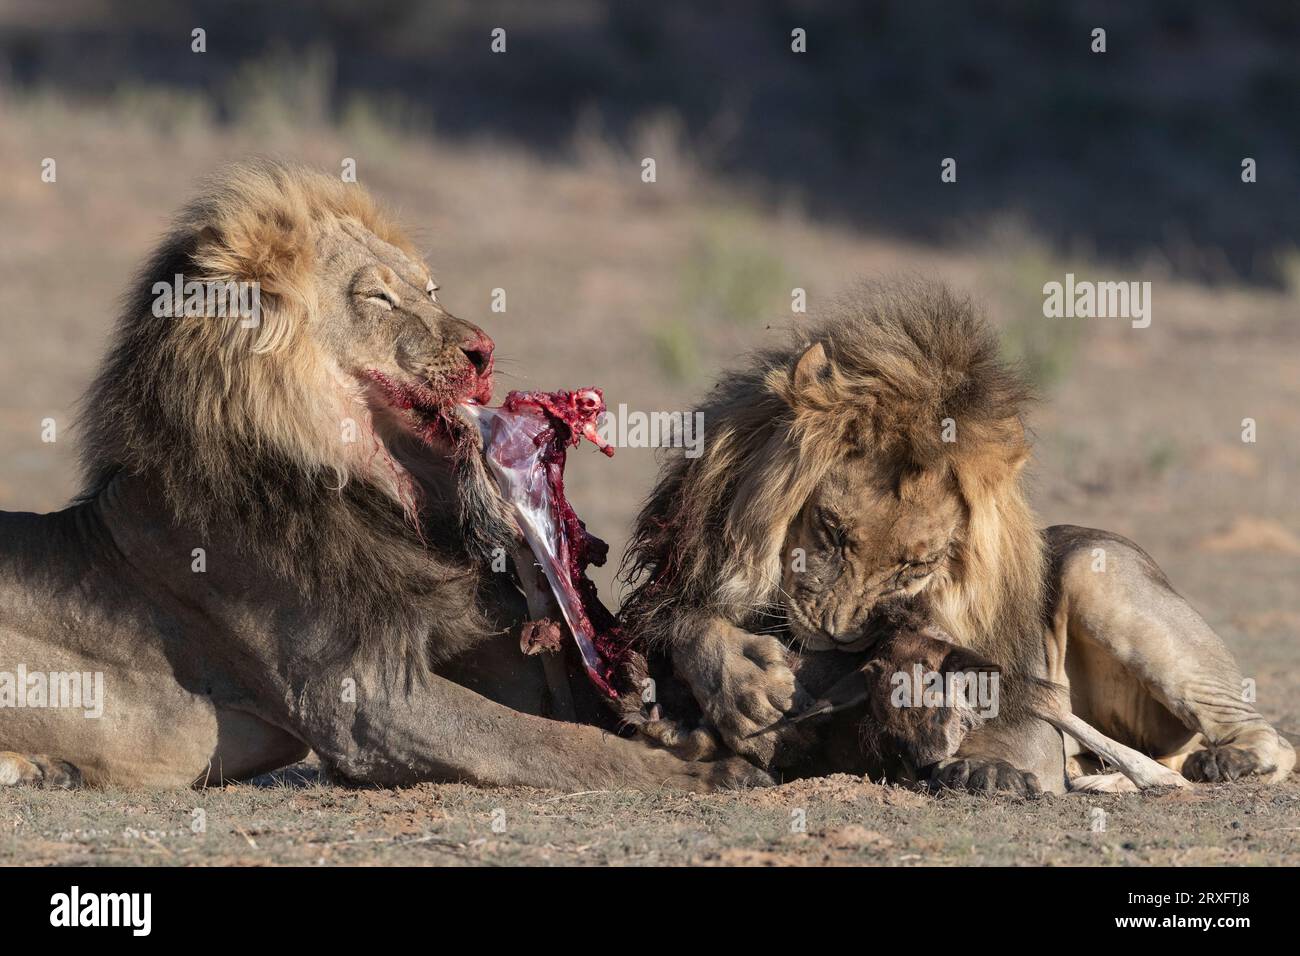 Lions (Panthera leo) feeding on young wildebeest (Connochaetes taurinus), Kgalagadi transfrontier park, Northern Cape, South Africa Stock Photo